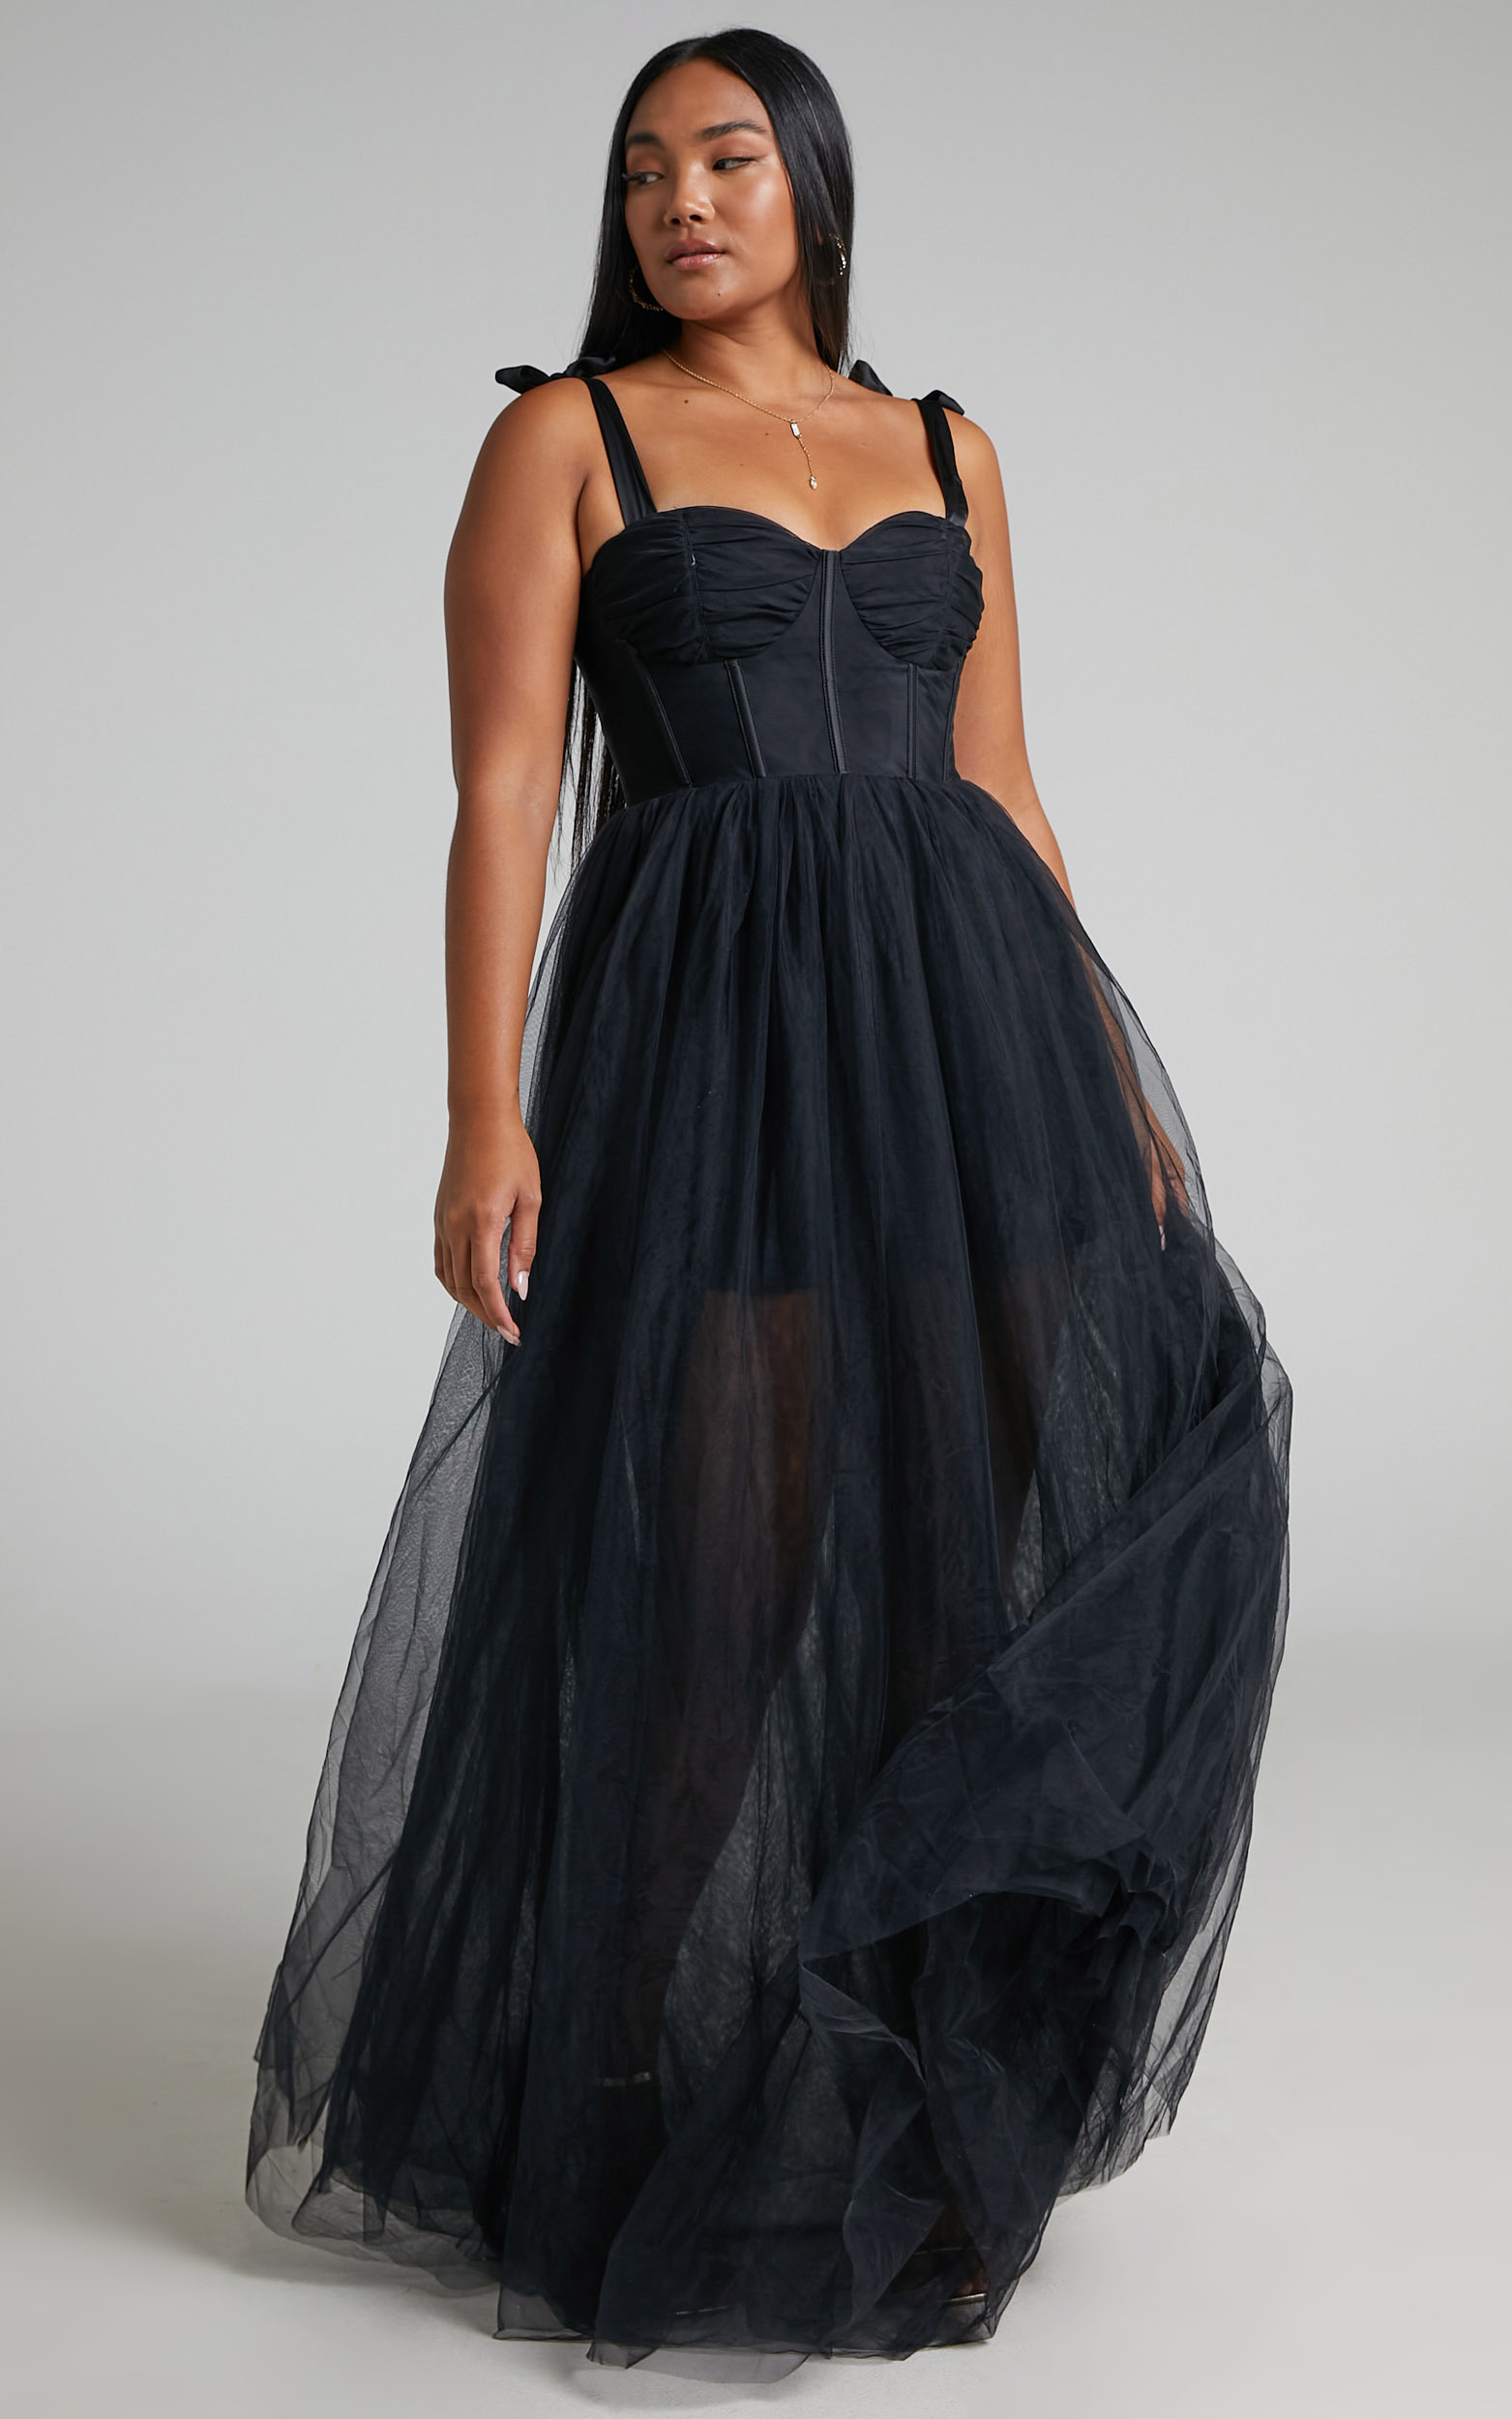 Emmary Bustier Bodice Tulle Gown in Black - 06, BLK1, hi-res image number null